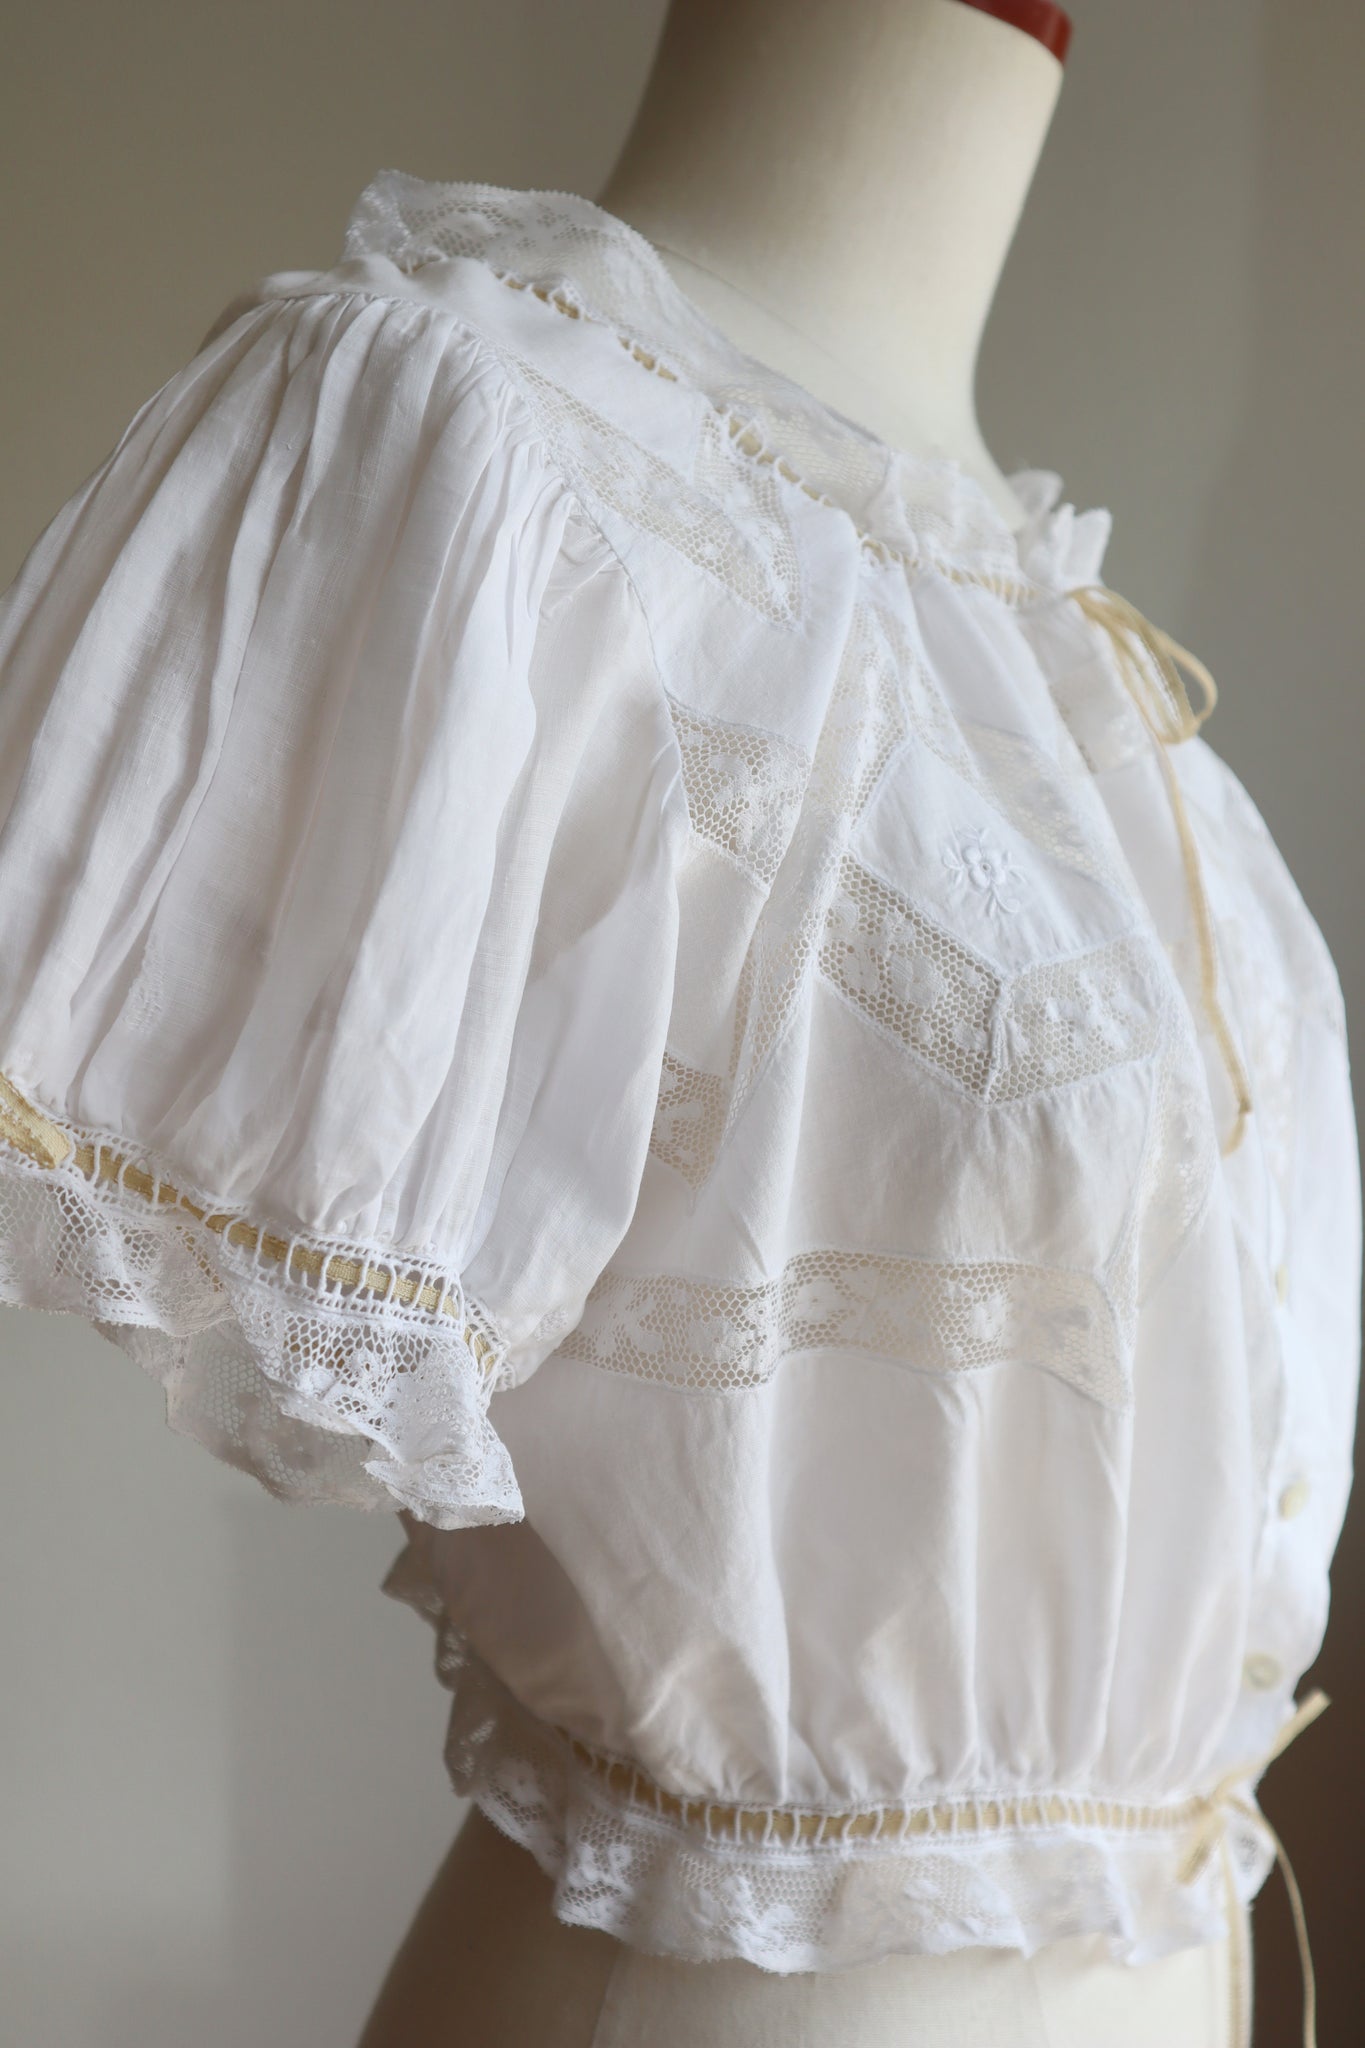 1910s Puff Sleeve Lawn Cotton Corset Cover